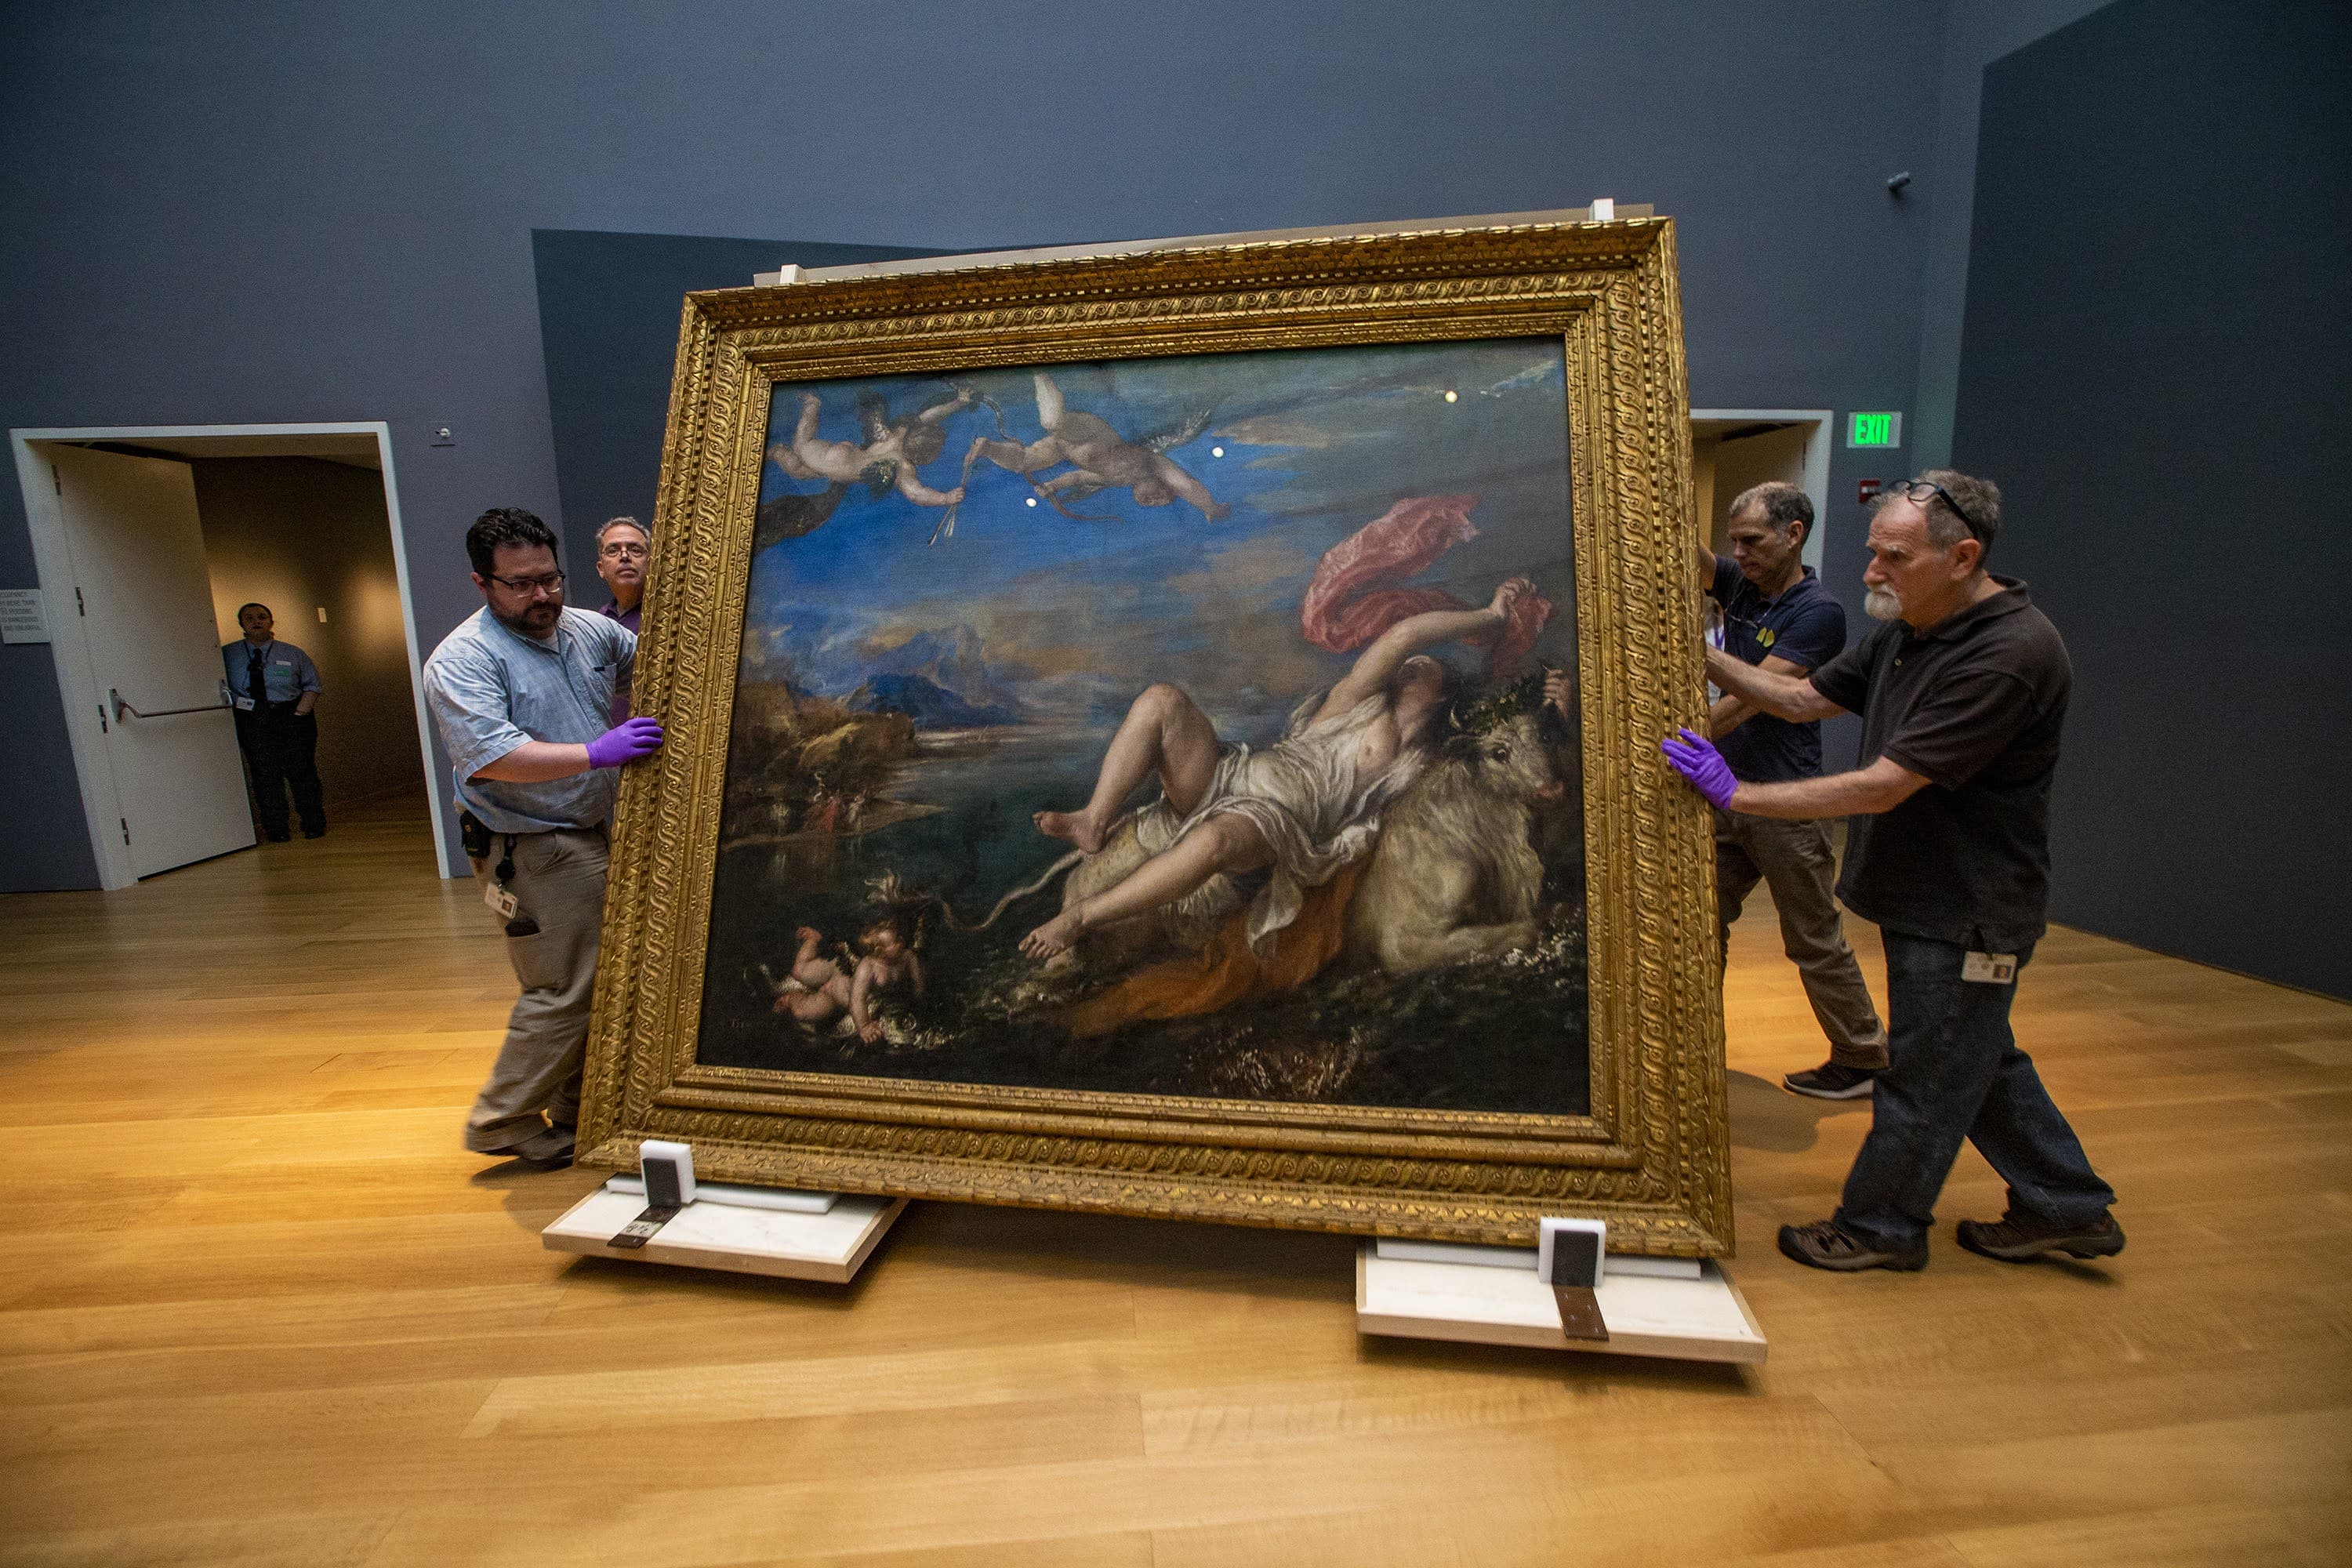 Installers move Titian’s &quot;The Rape of Europa&quot; across the Hostetter Gallery after its return to the Isabella Stewart Gardner Museum from being on loan to the Prado Museum in Madrid, Spain. (Jesse Costa/WBUR)